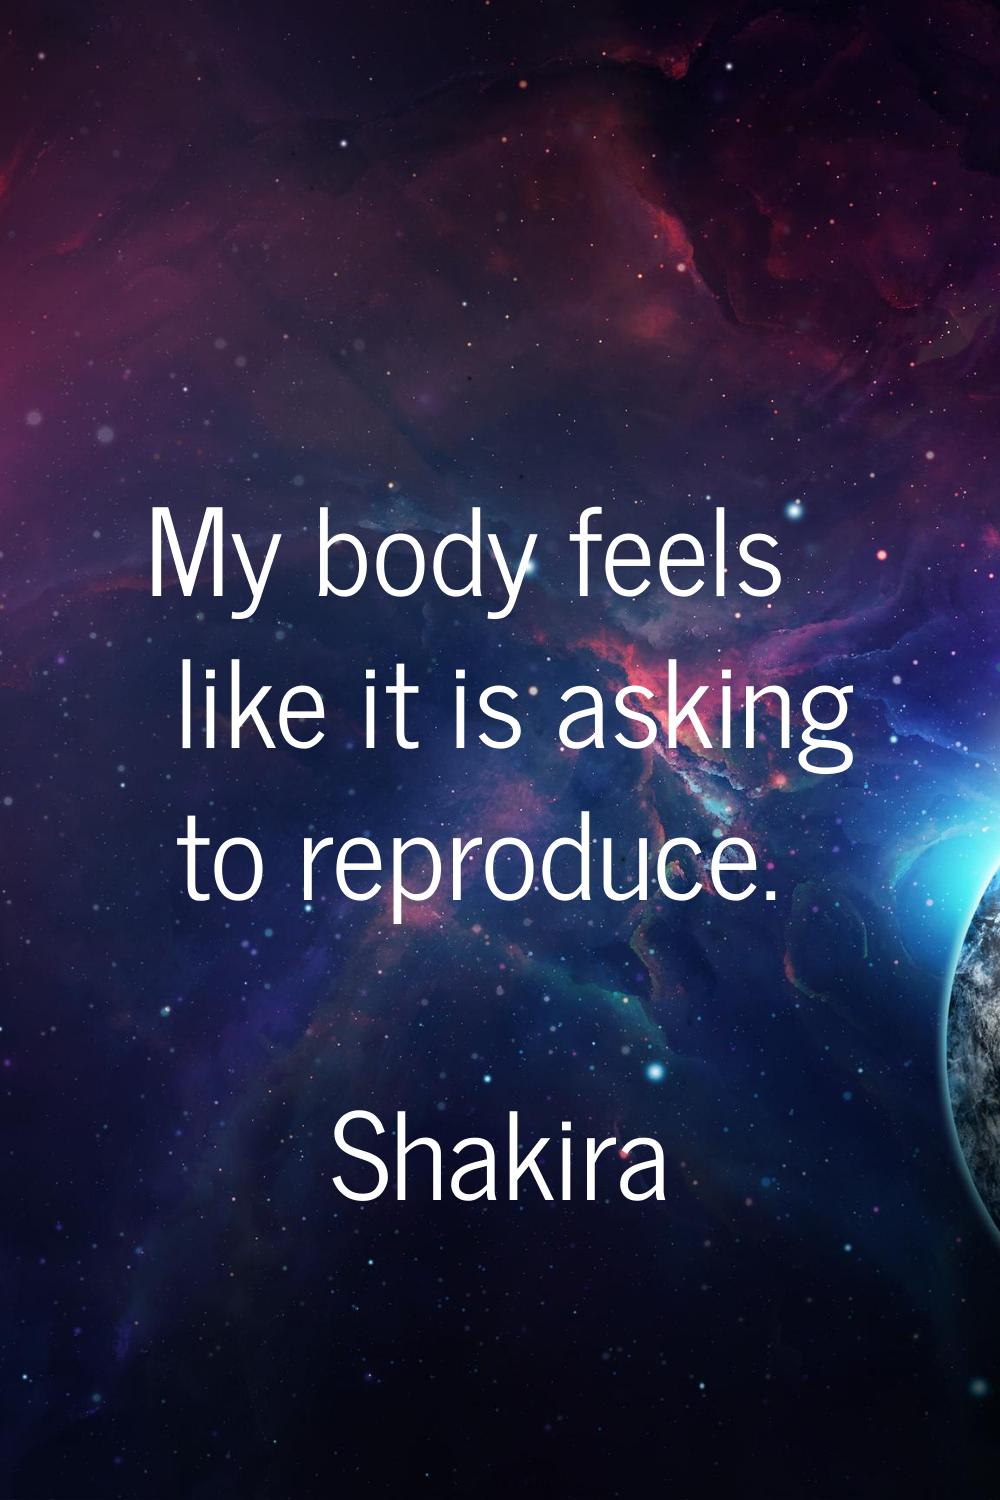 My body feels like it is asking to reproduce.